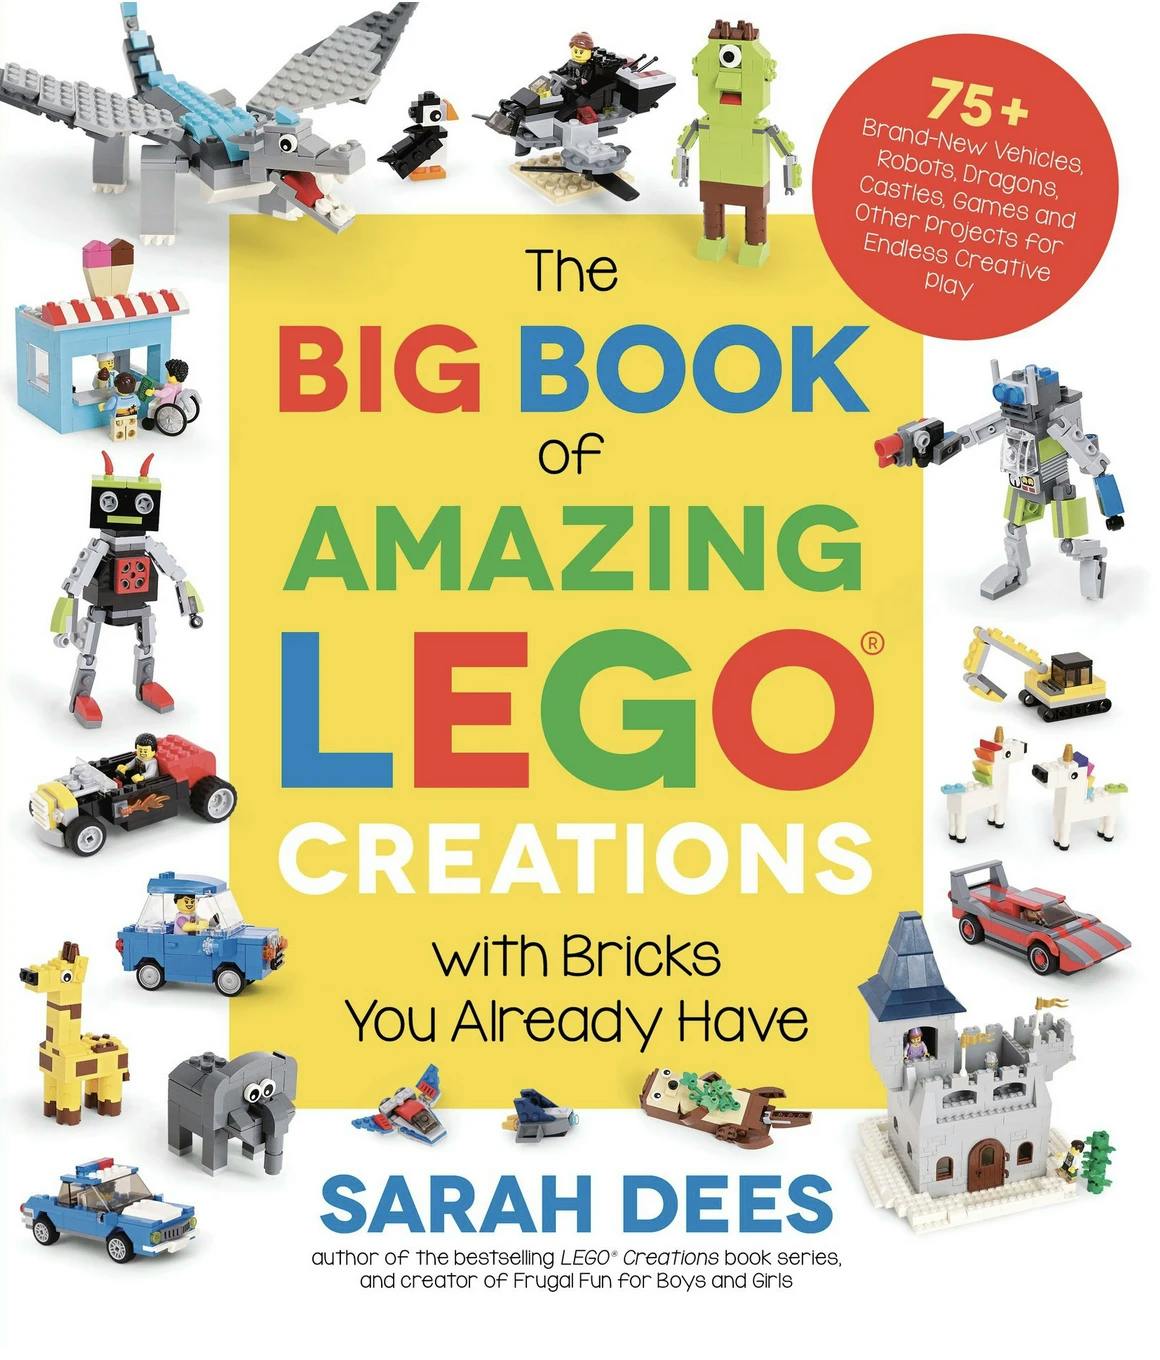 The Big Book of Amazing LEGO Creations with Bricks You Already Have